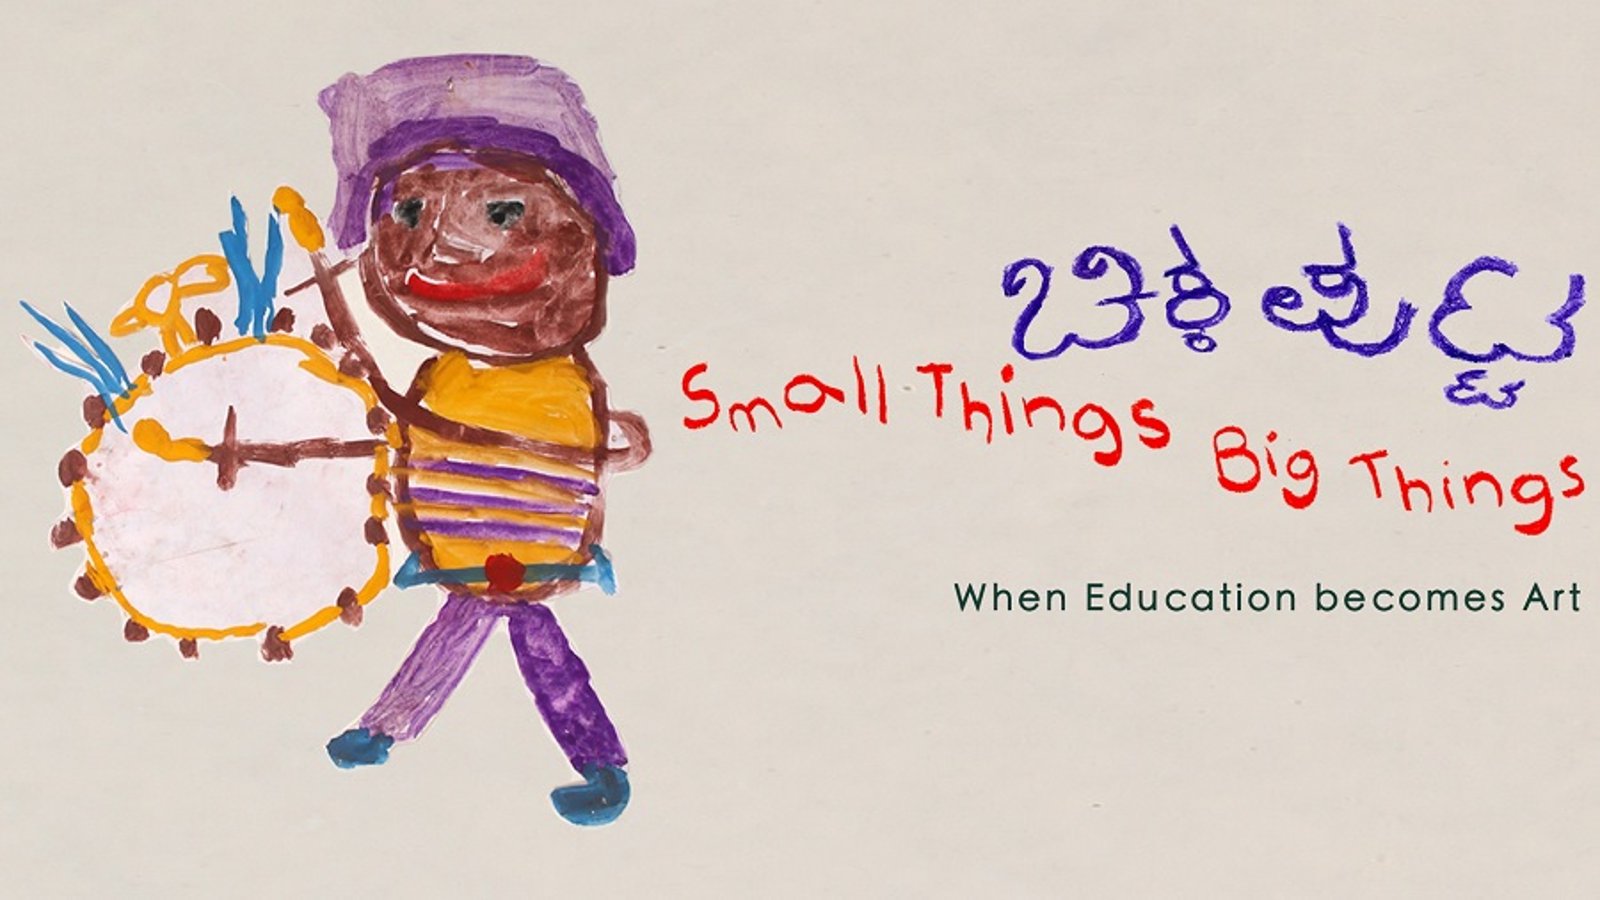 Small Things, Big Things - Education Through Emotion, Creativity and Social Interaction